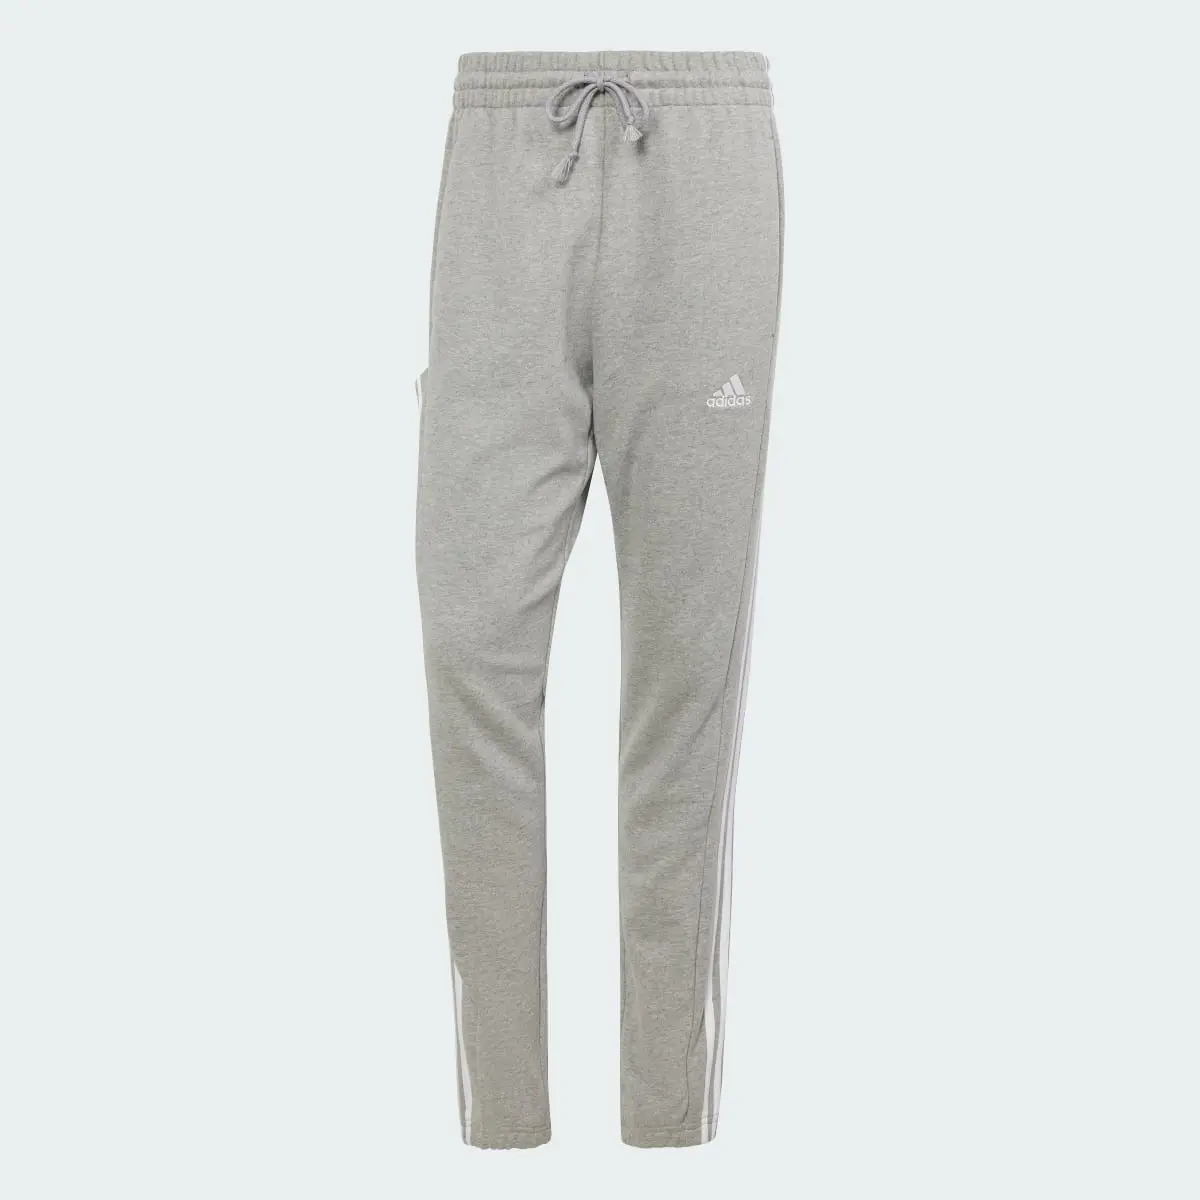 Adidas Essentials French Terry Tapered Elastic Cuff 3-Stripes Pants. 3